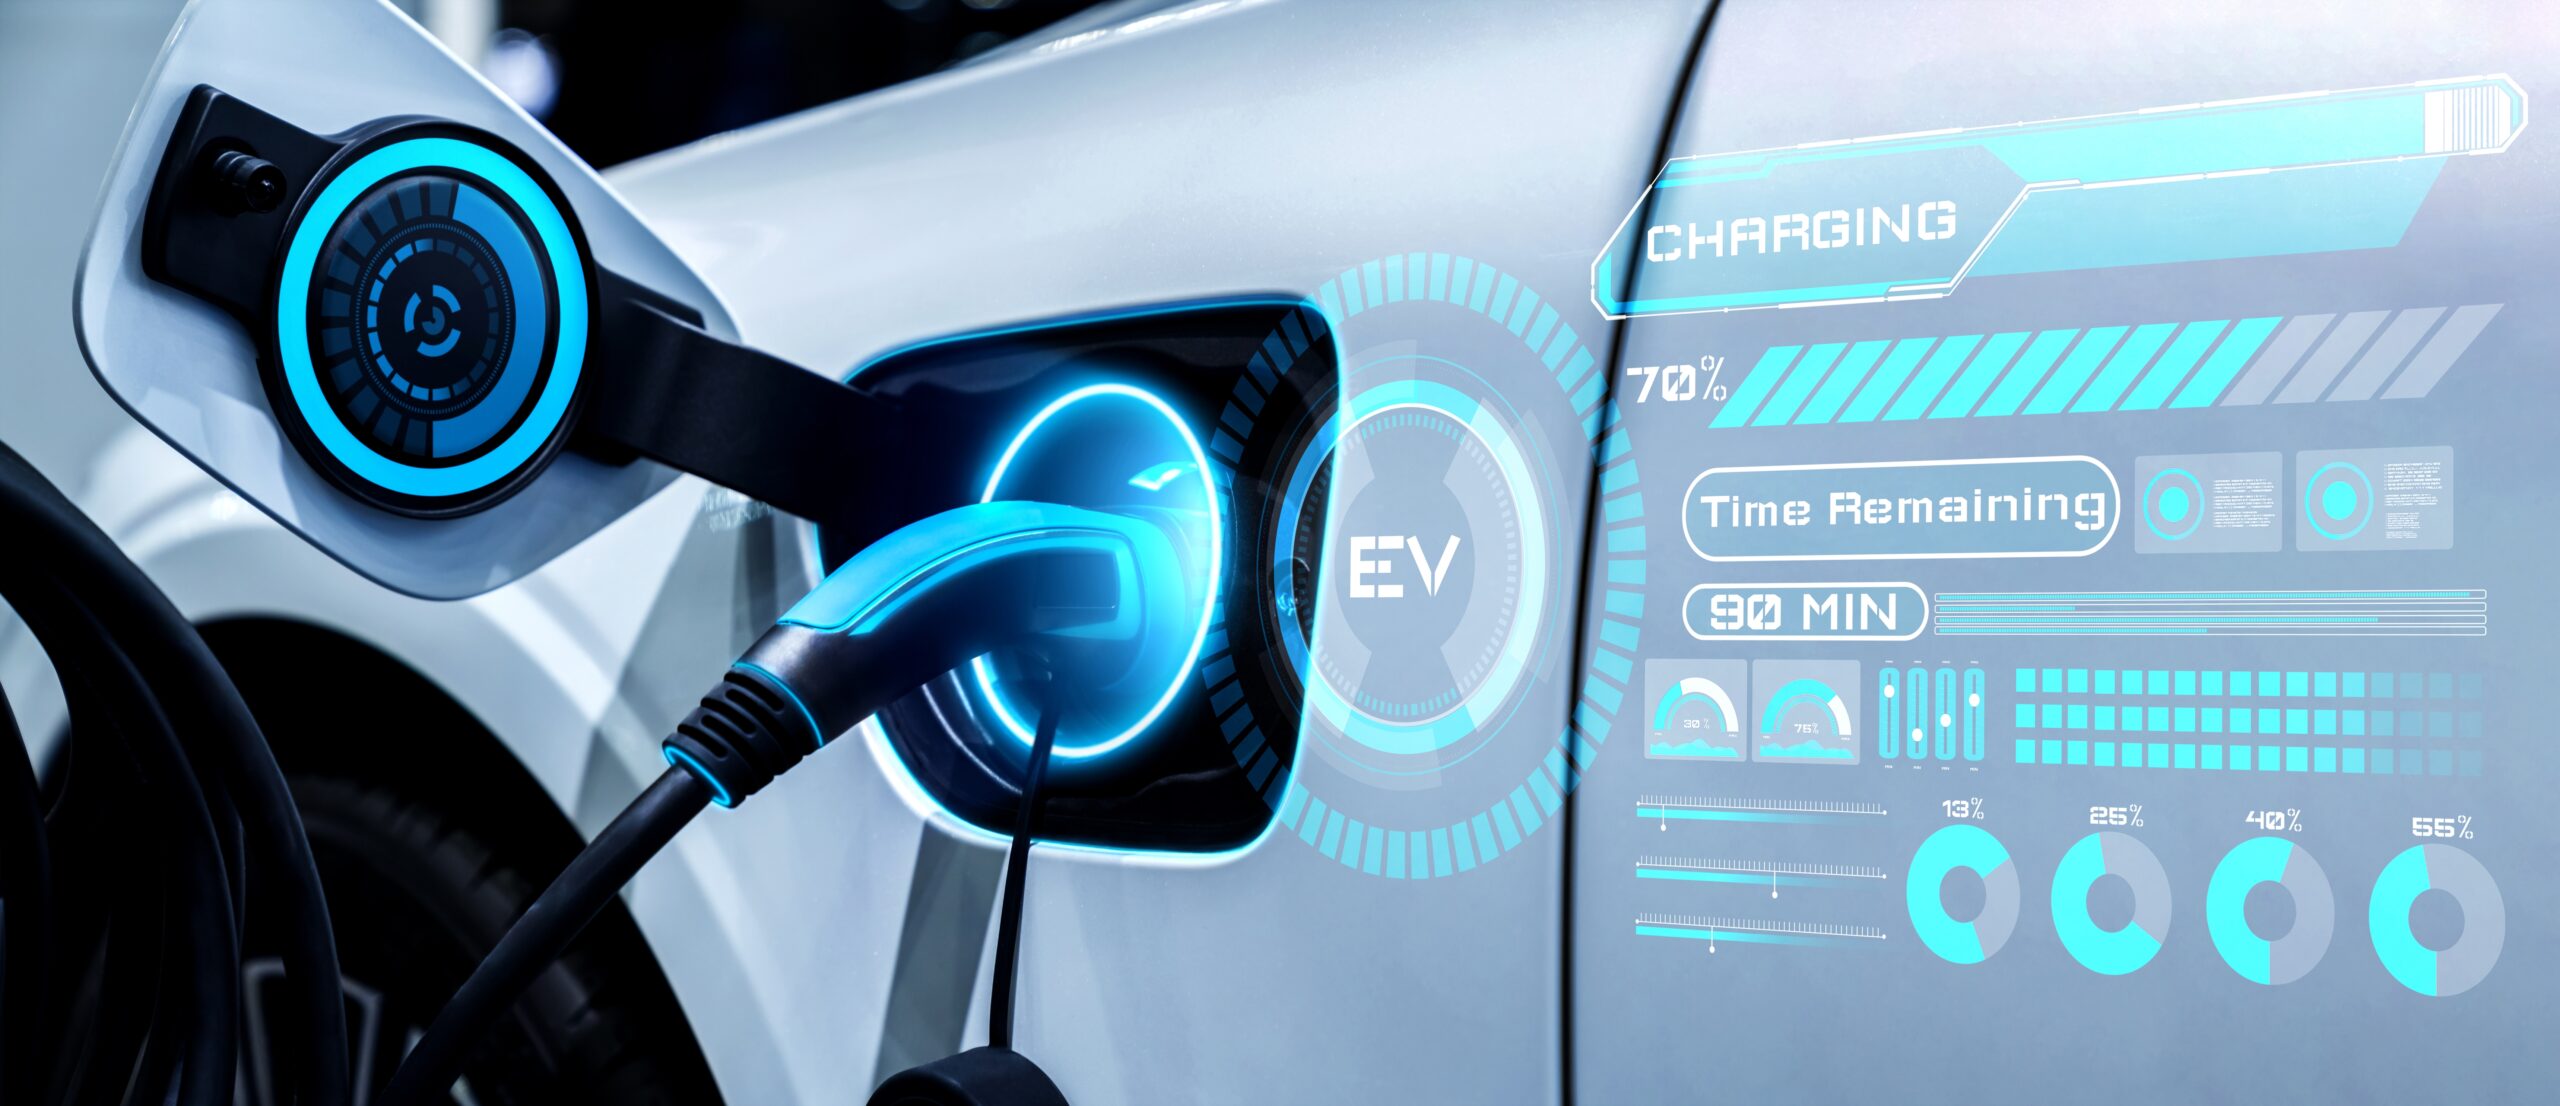 Automated Charging: Do We Have to Settle the EVSE vs. Telematics Debate?